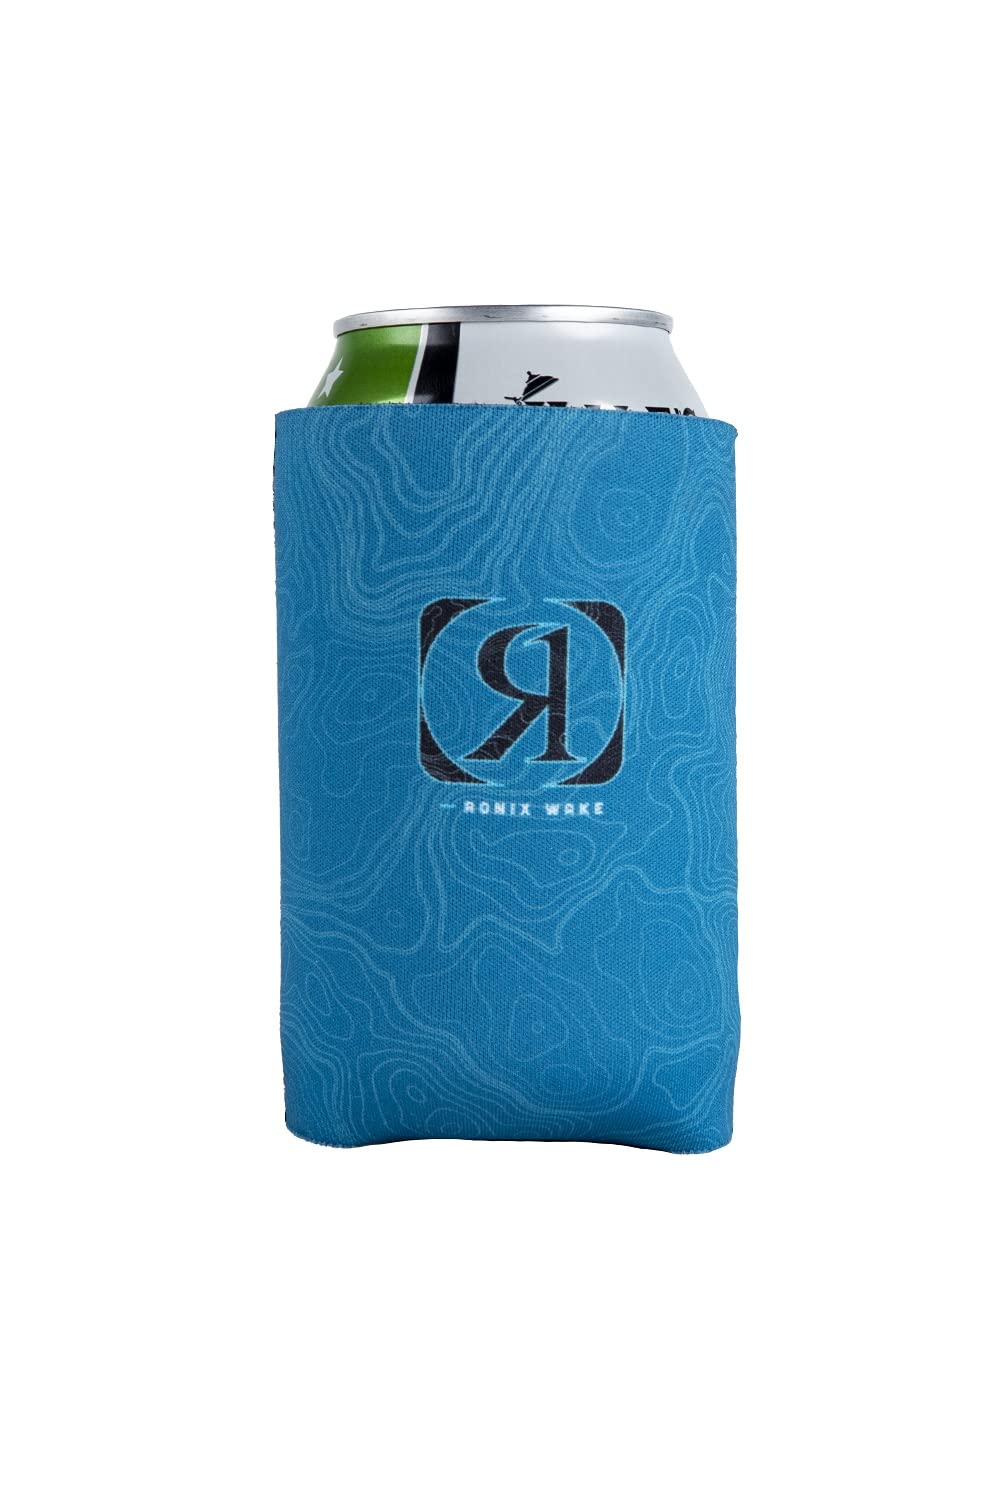 Ronix Coldy-Holdy Drink Holder